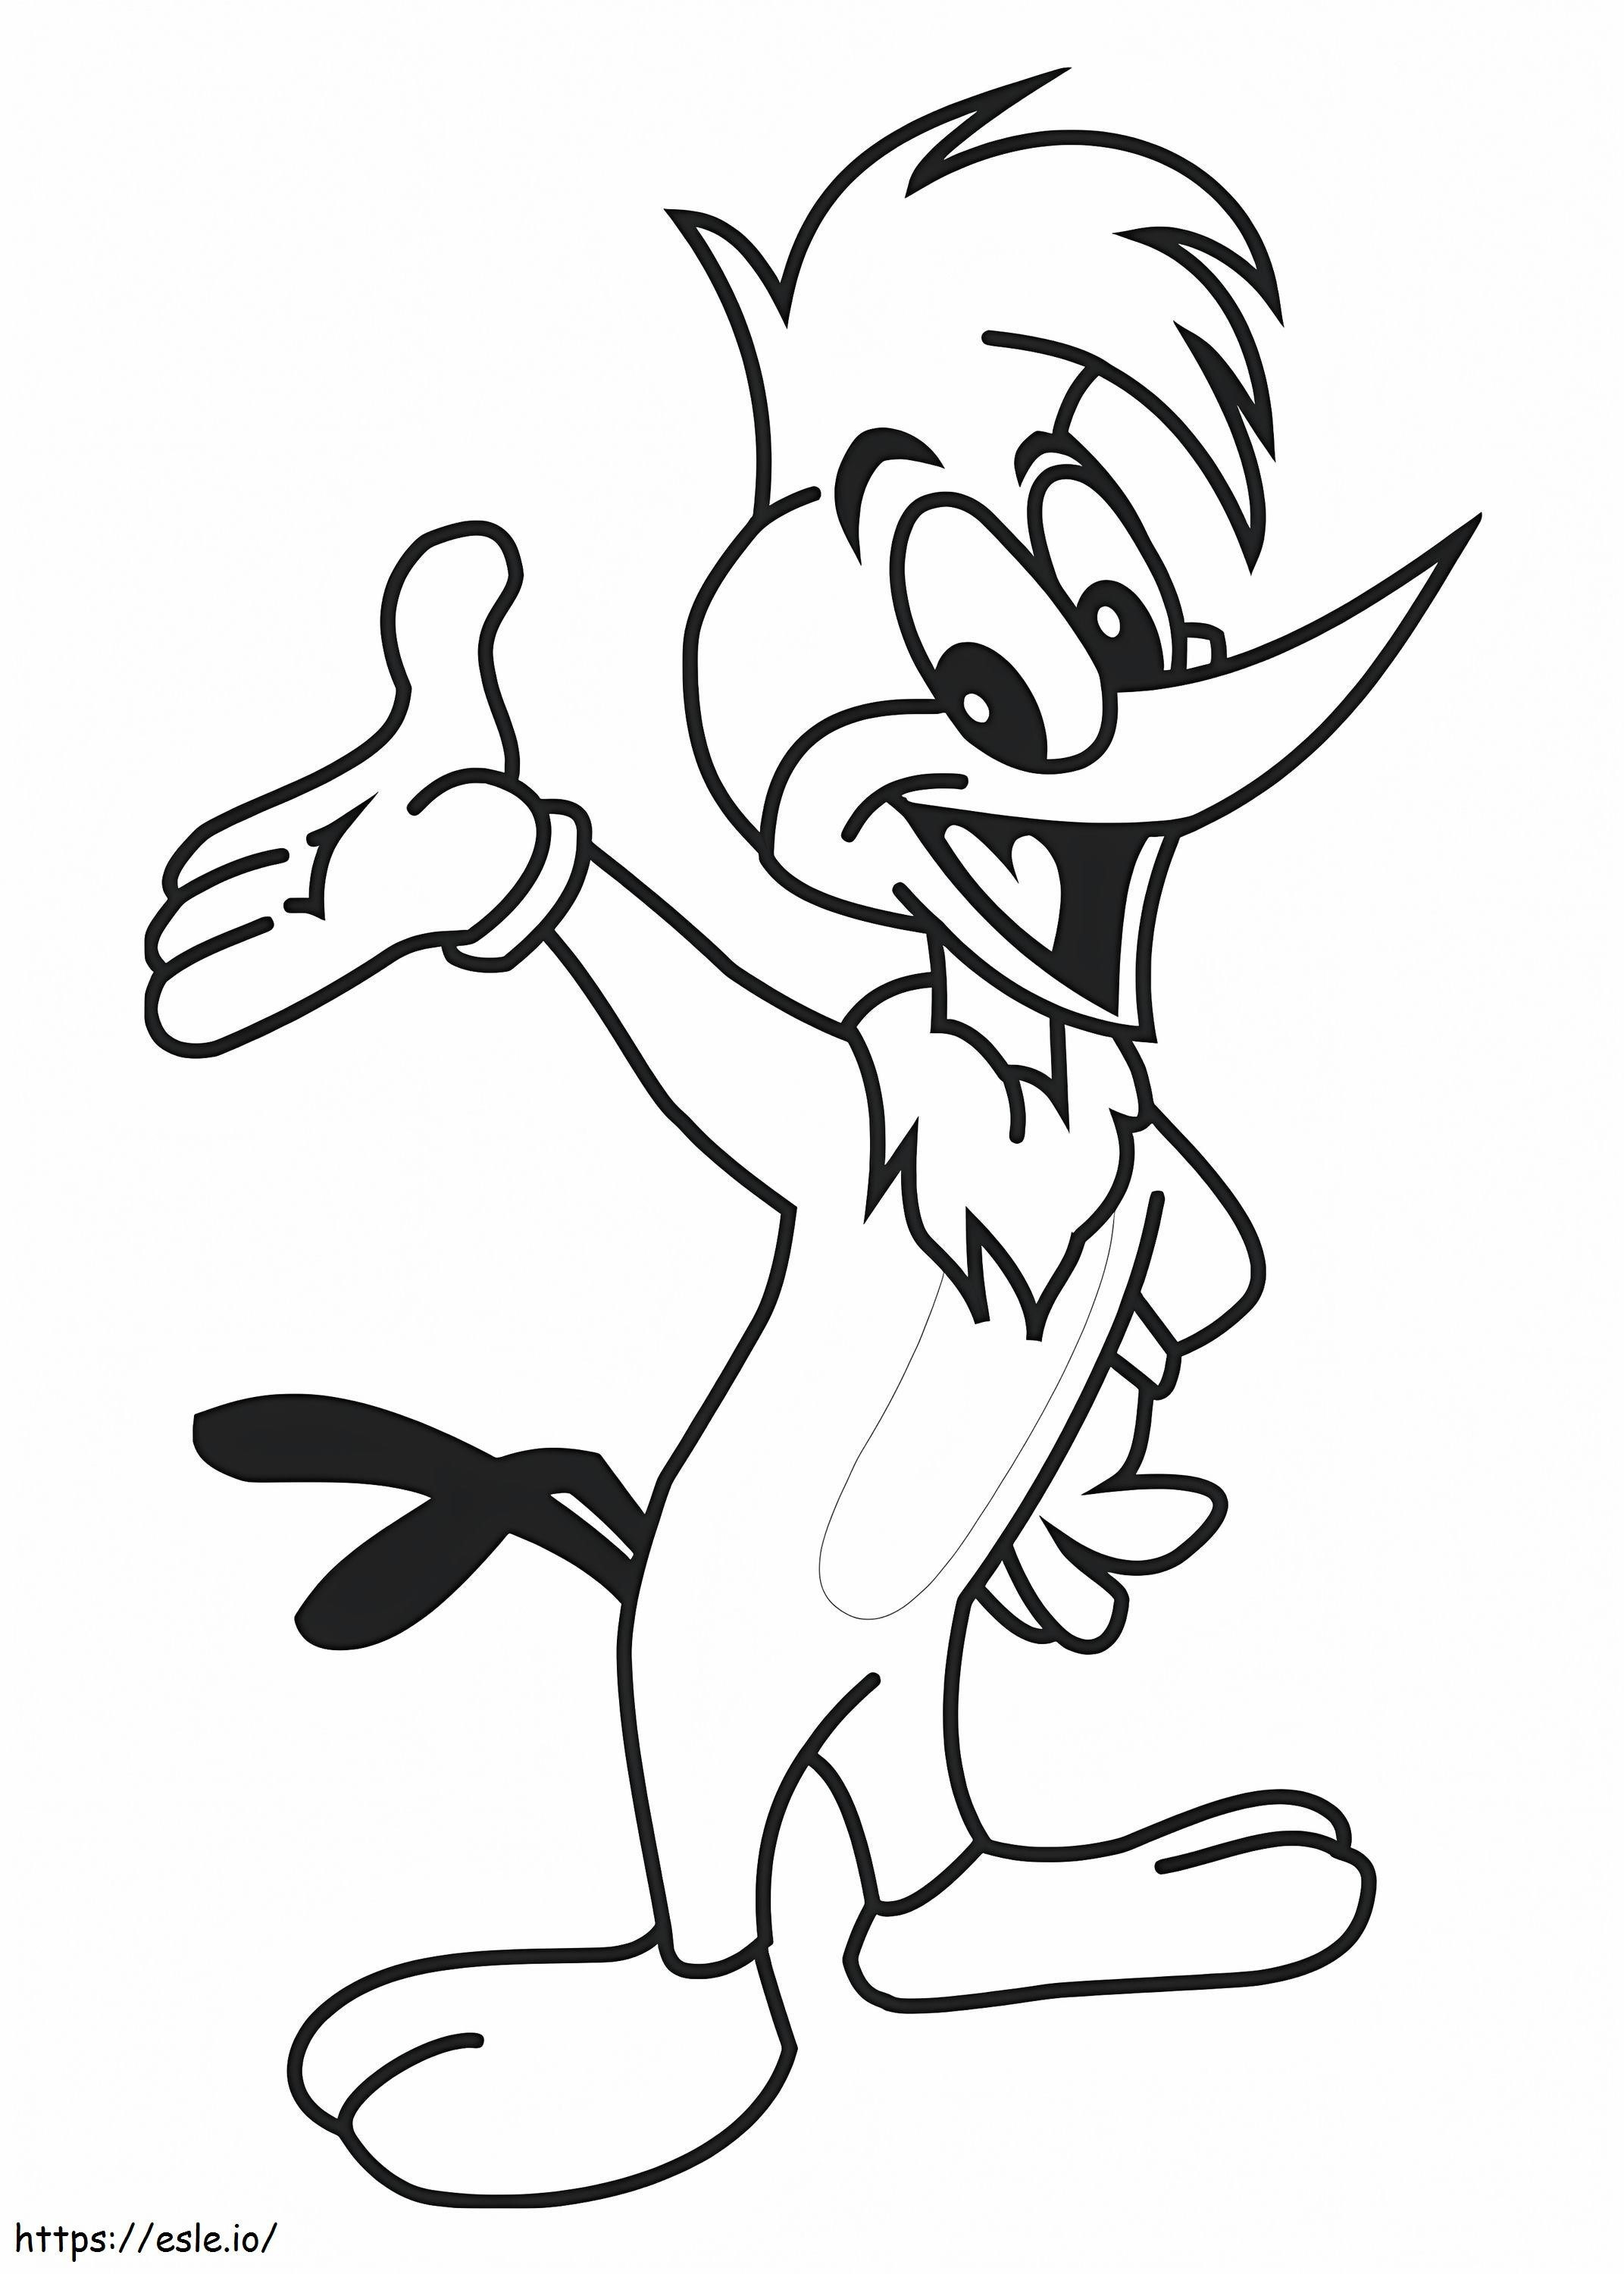 Woody Woodpecker 2 coloring page